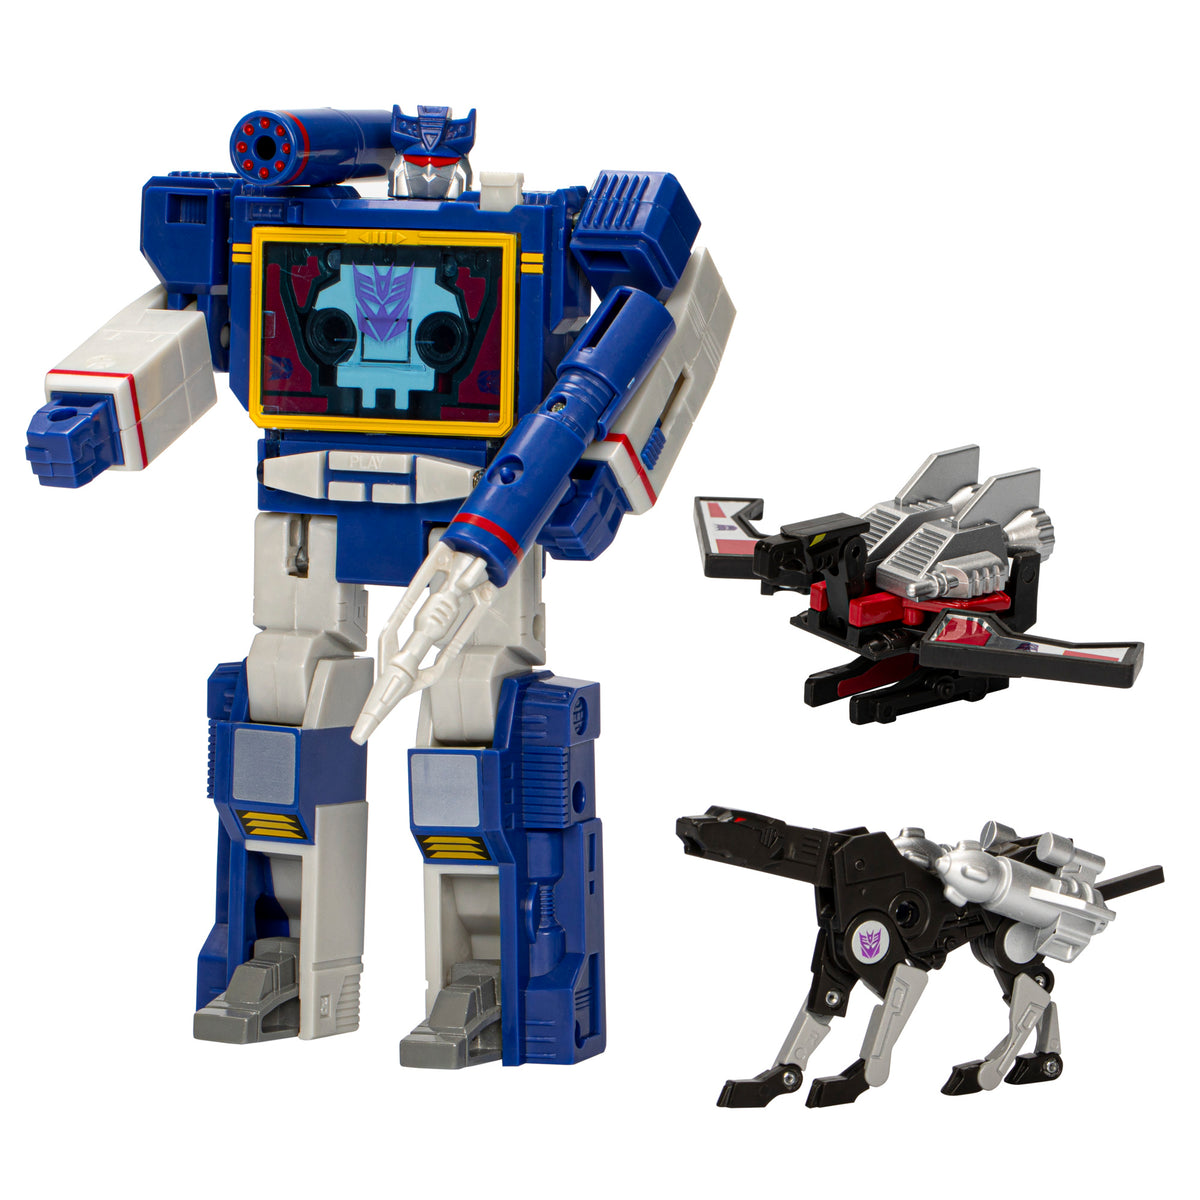 Collectible Transformers Toys and Action Figures